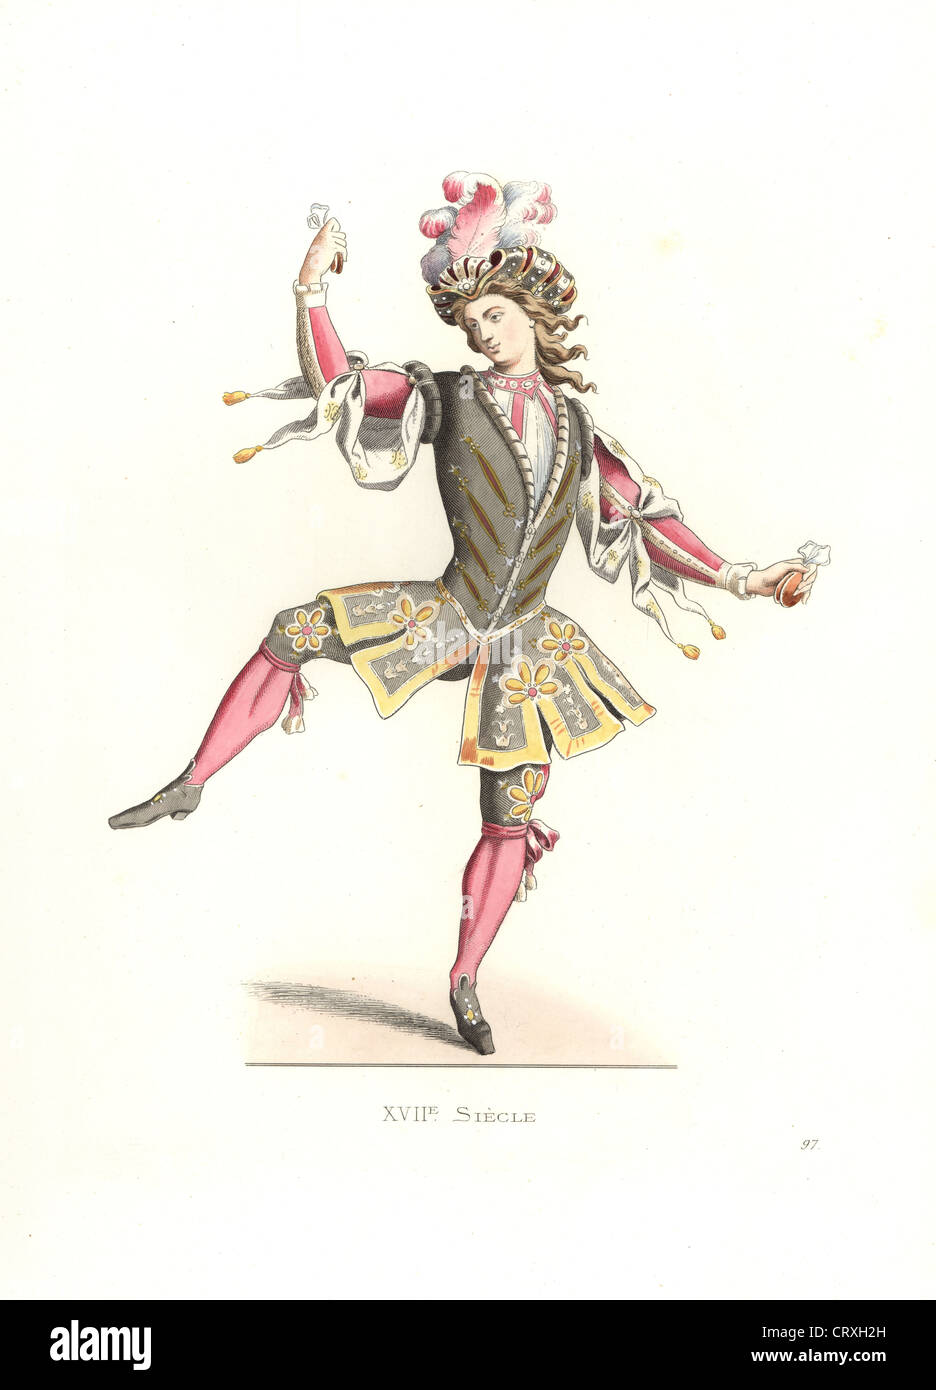 French man in ballet costume, 17th century, from a ballet danced by King Louis XIV in Aix in 1660. Stock Photo